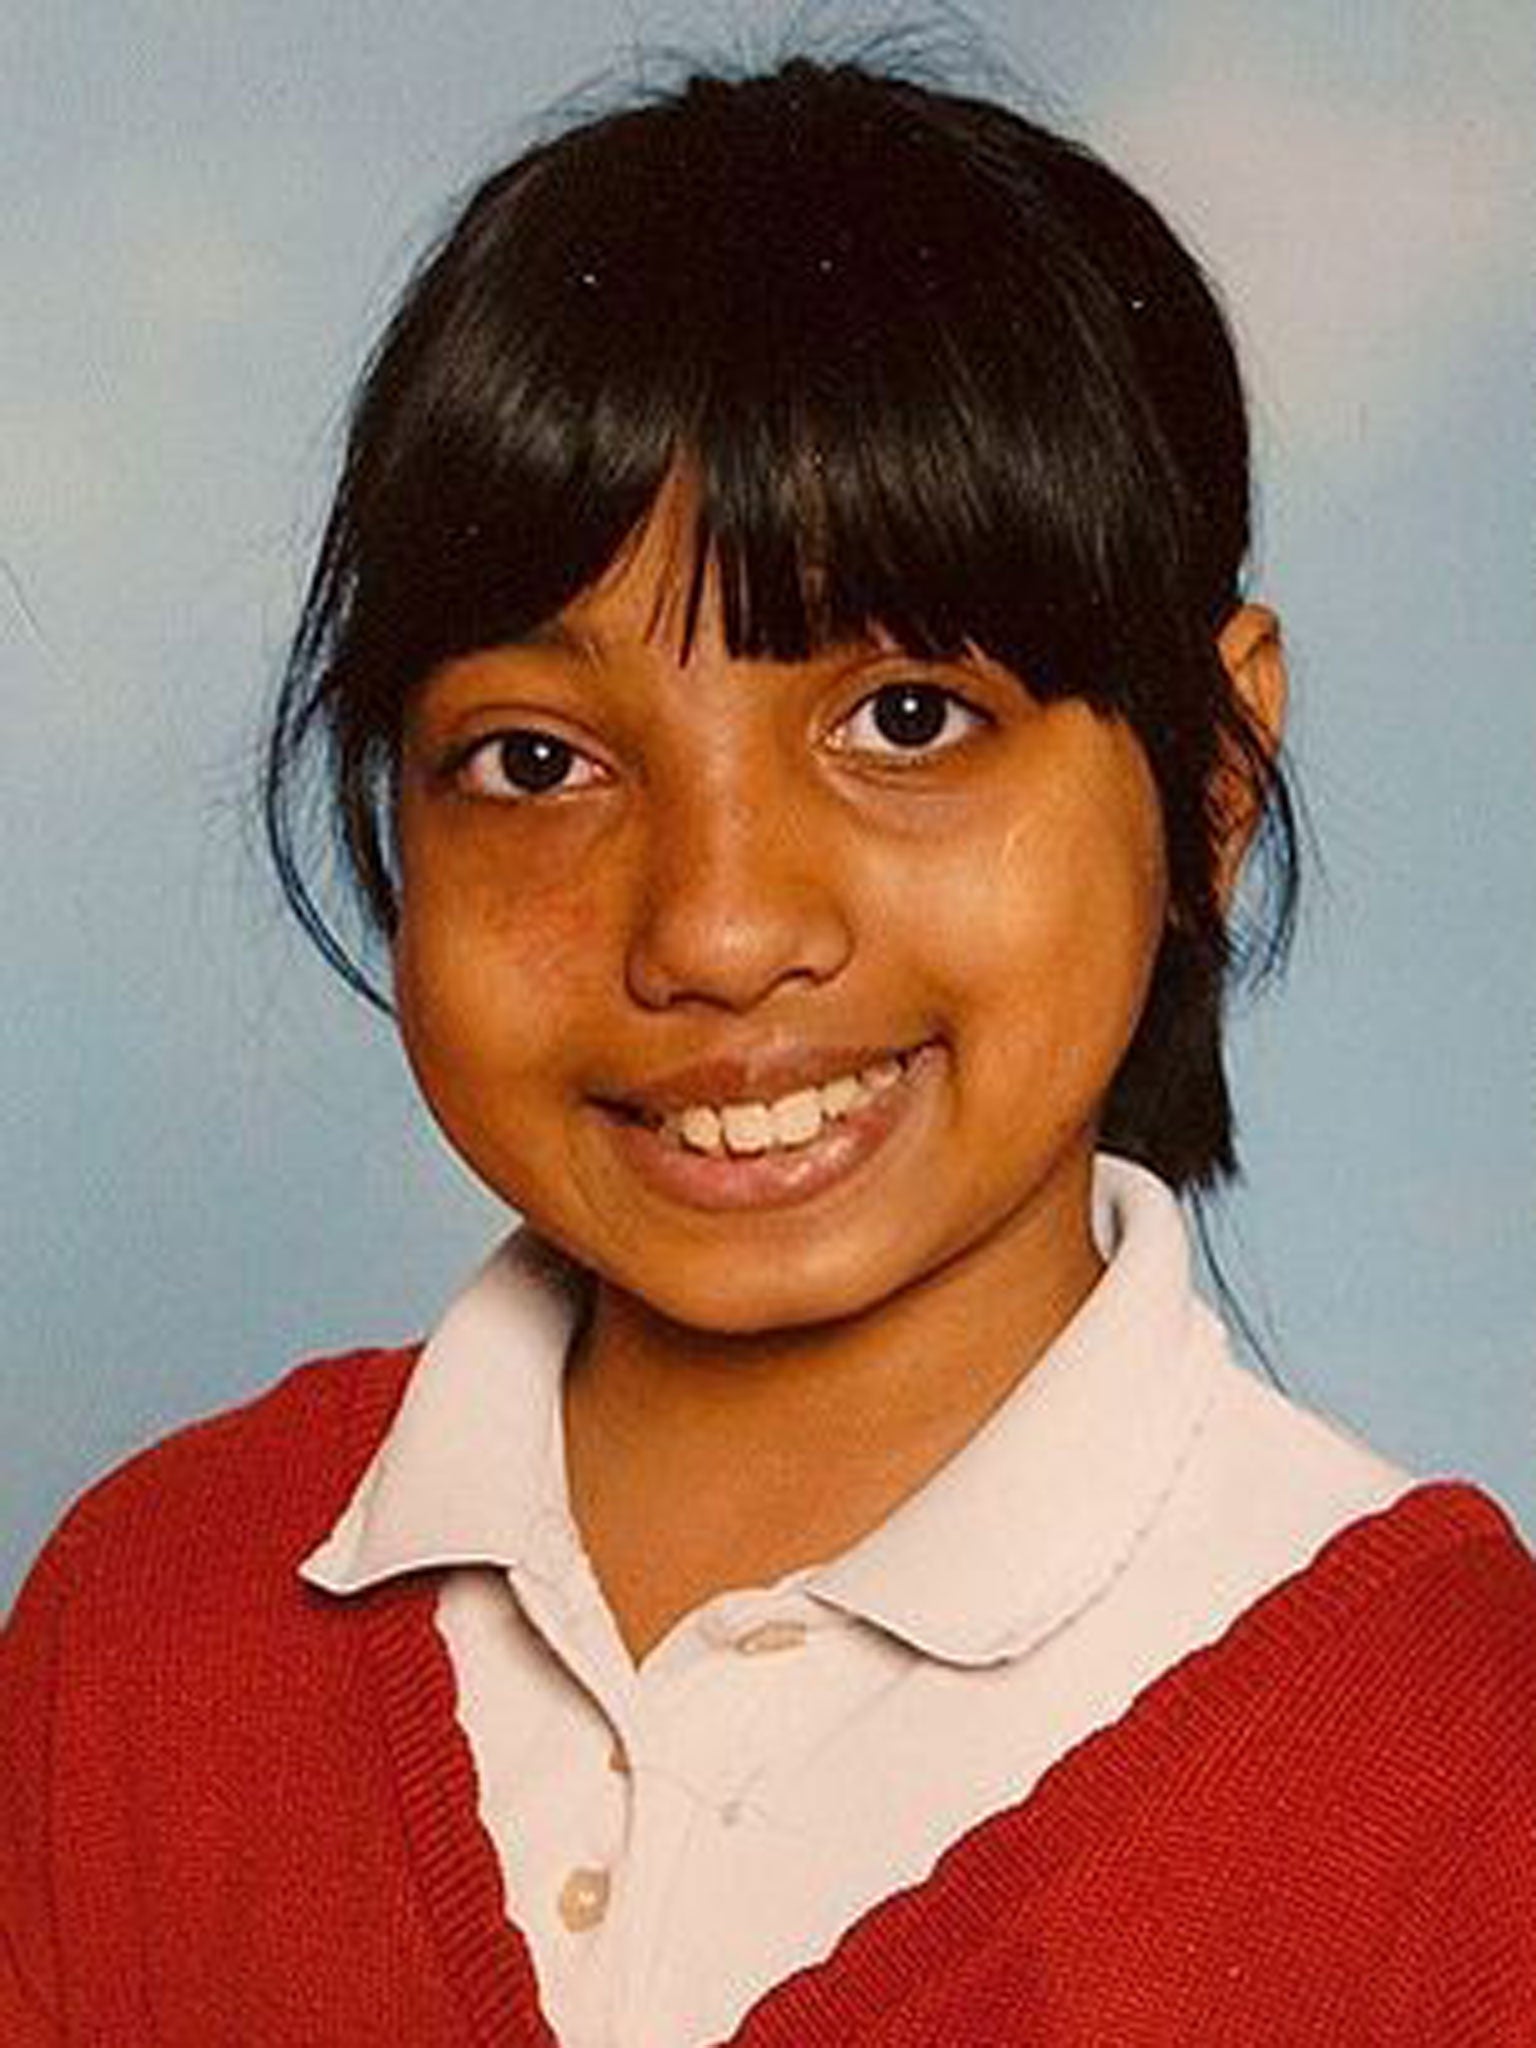 Maisha Najeeb, now 13 years old, suffered catastrophic and permanent brain damage when her brain was accidentally injected with glue